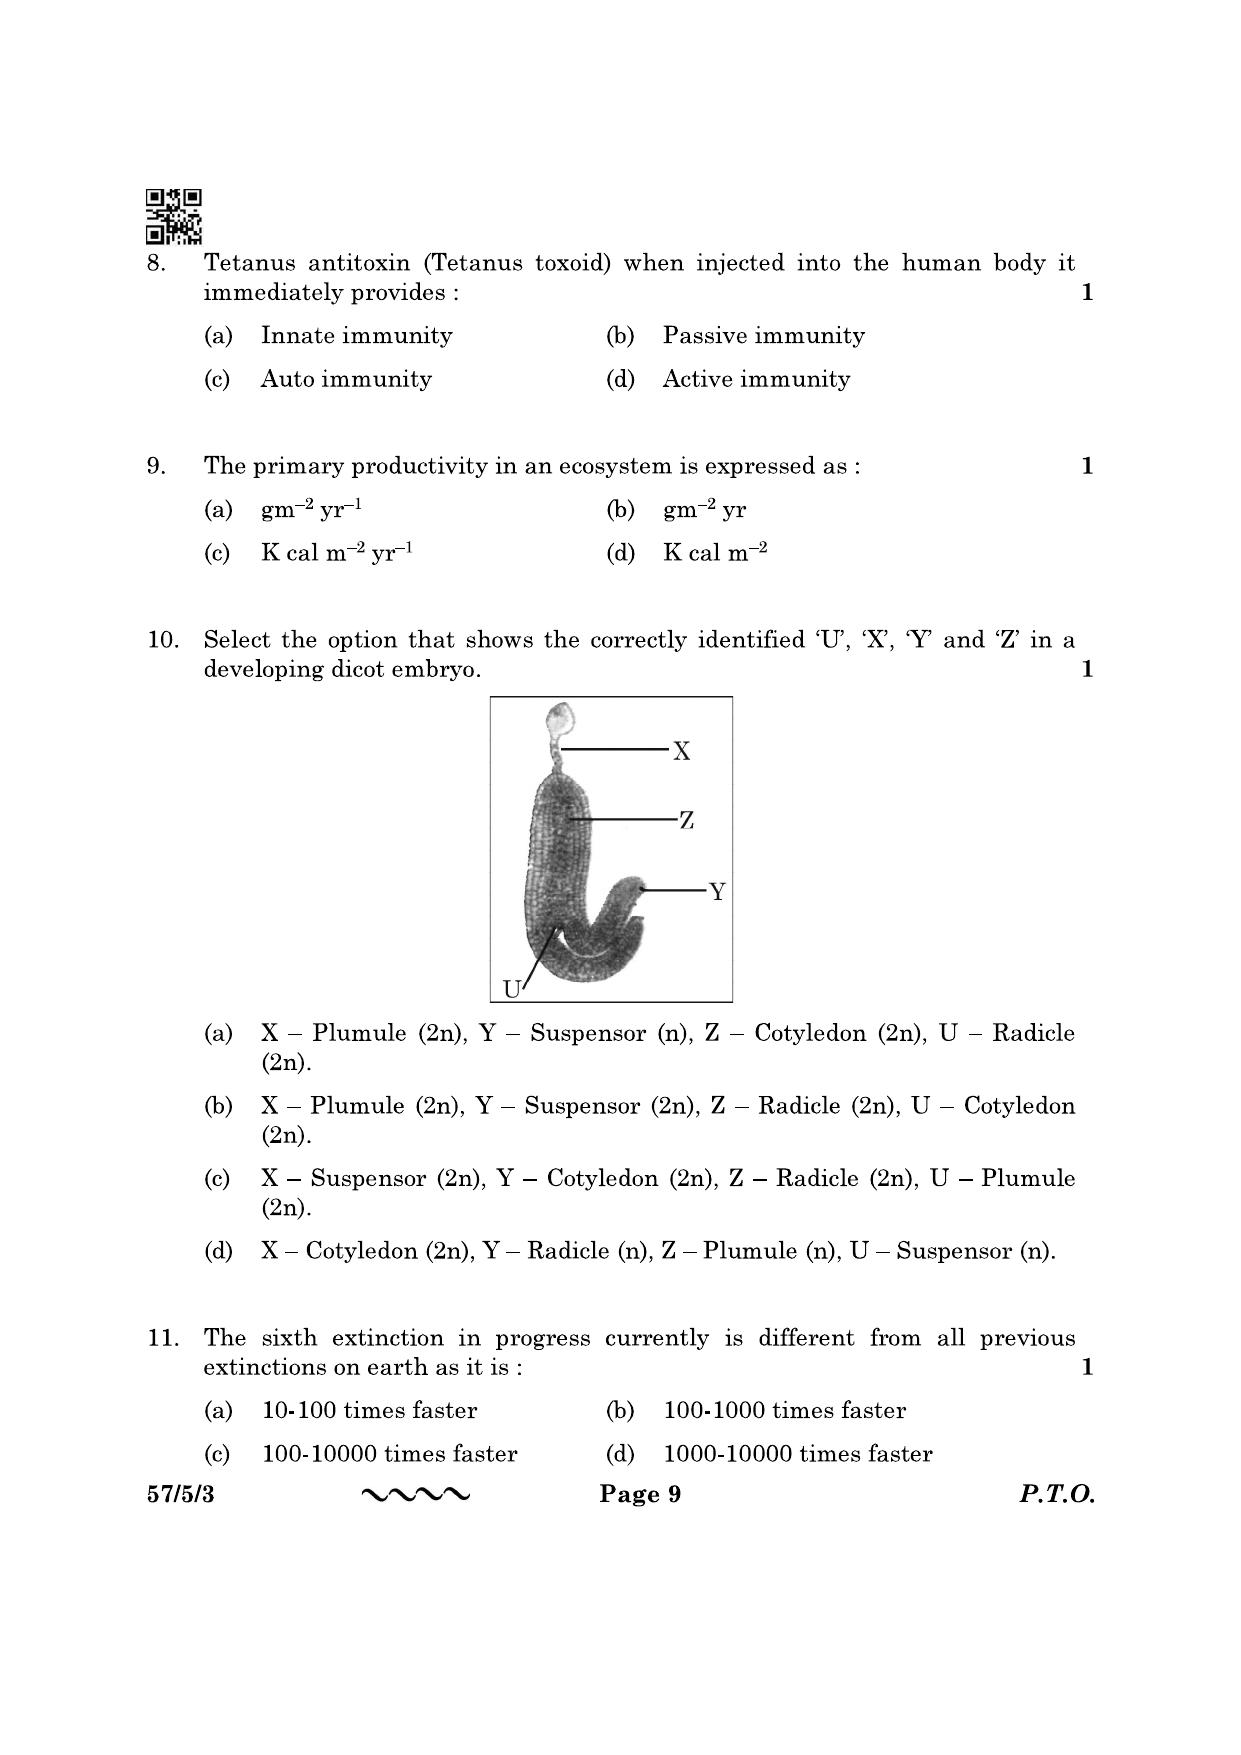 CBSE Class 12 57-5-3 Biology 2023 Question Paper - Page 9